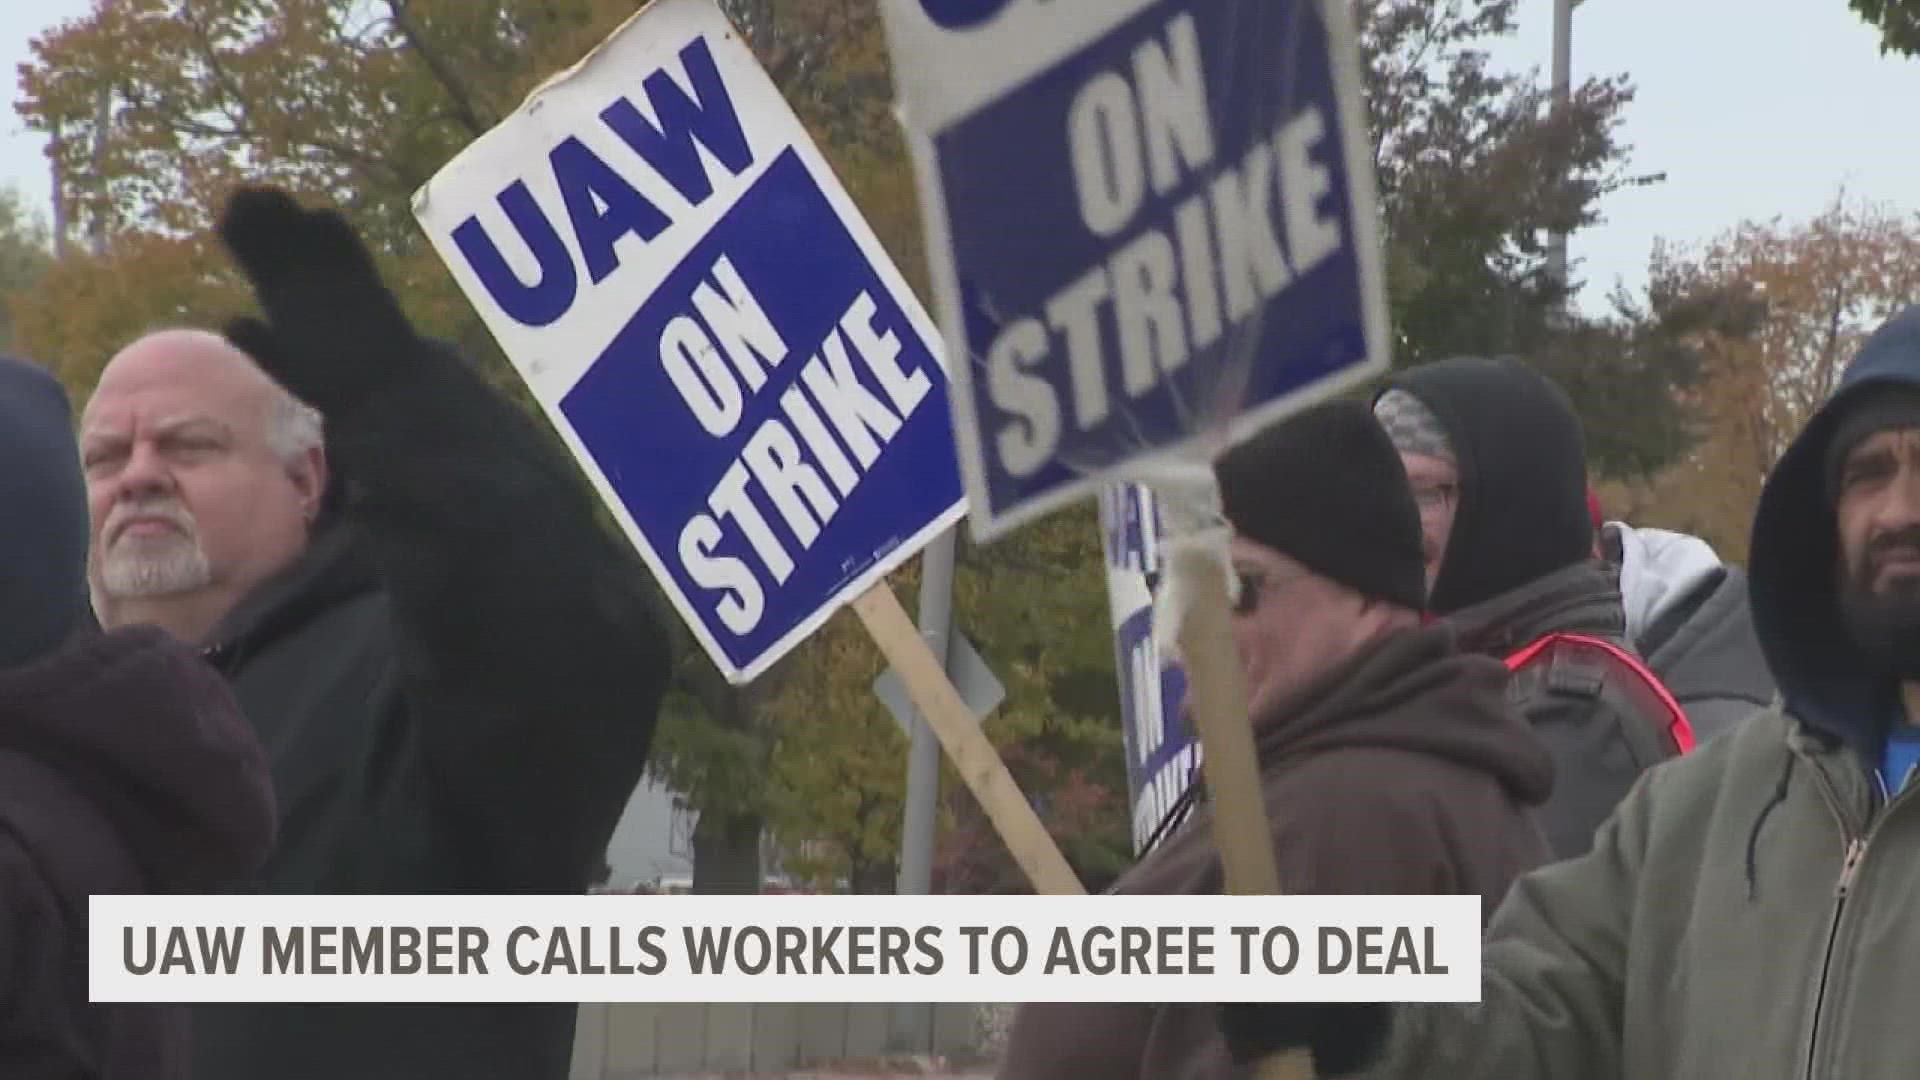 After voting down Deere's latest contract offer by just a 6% margin, one union member says he wants to go back to work.